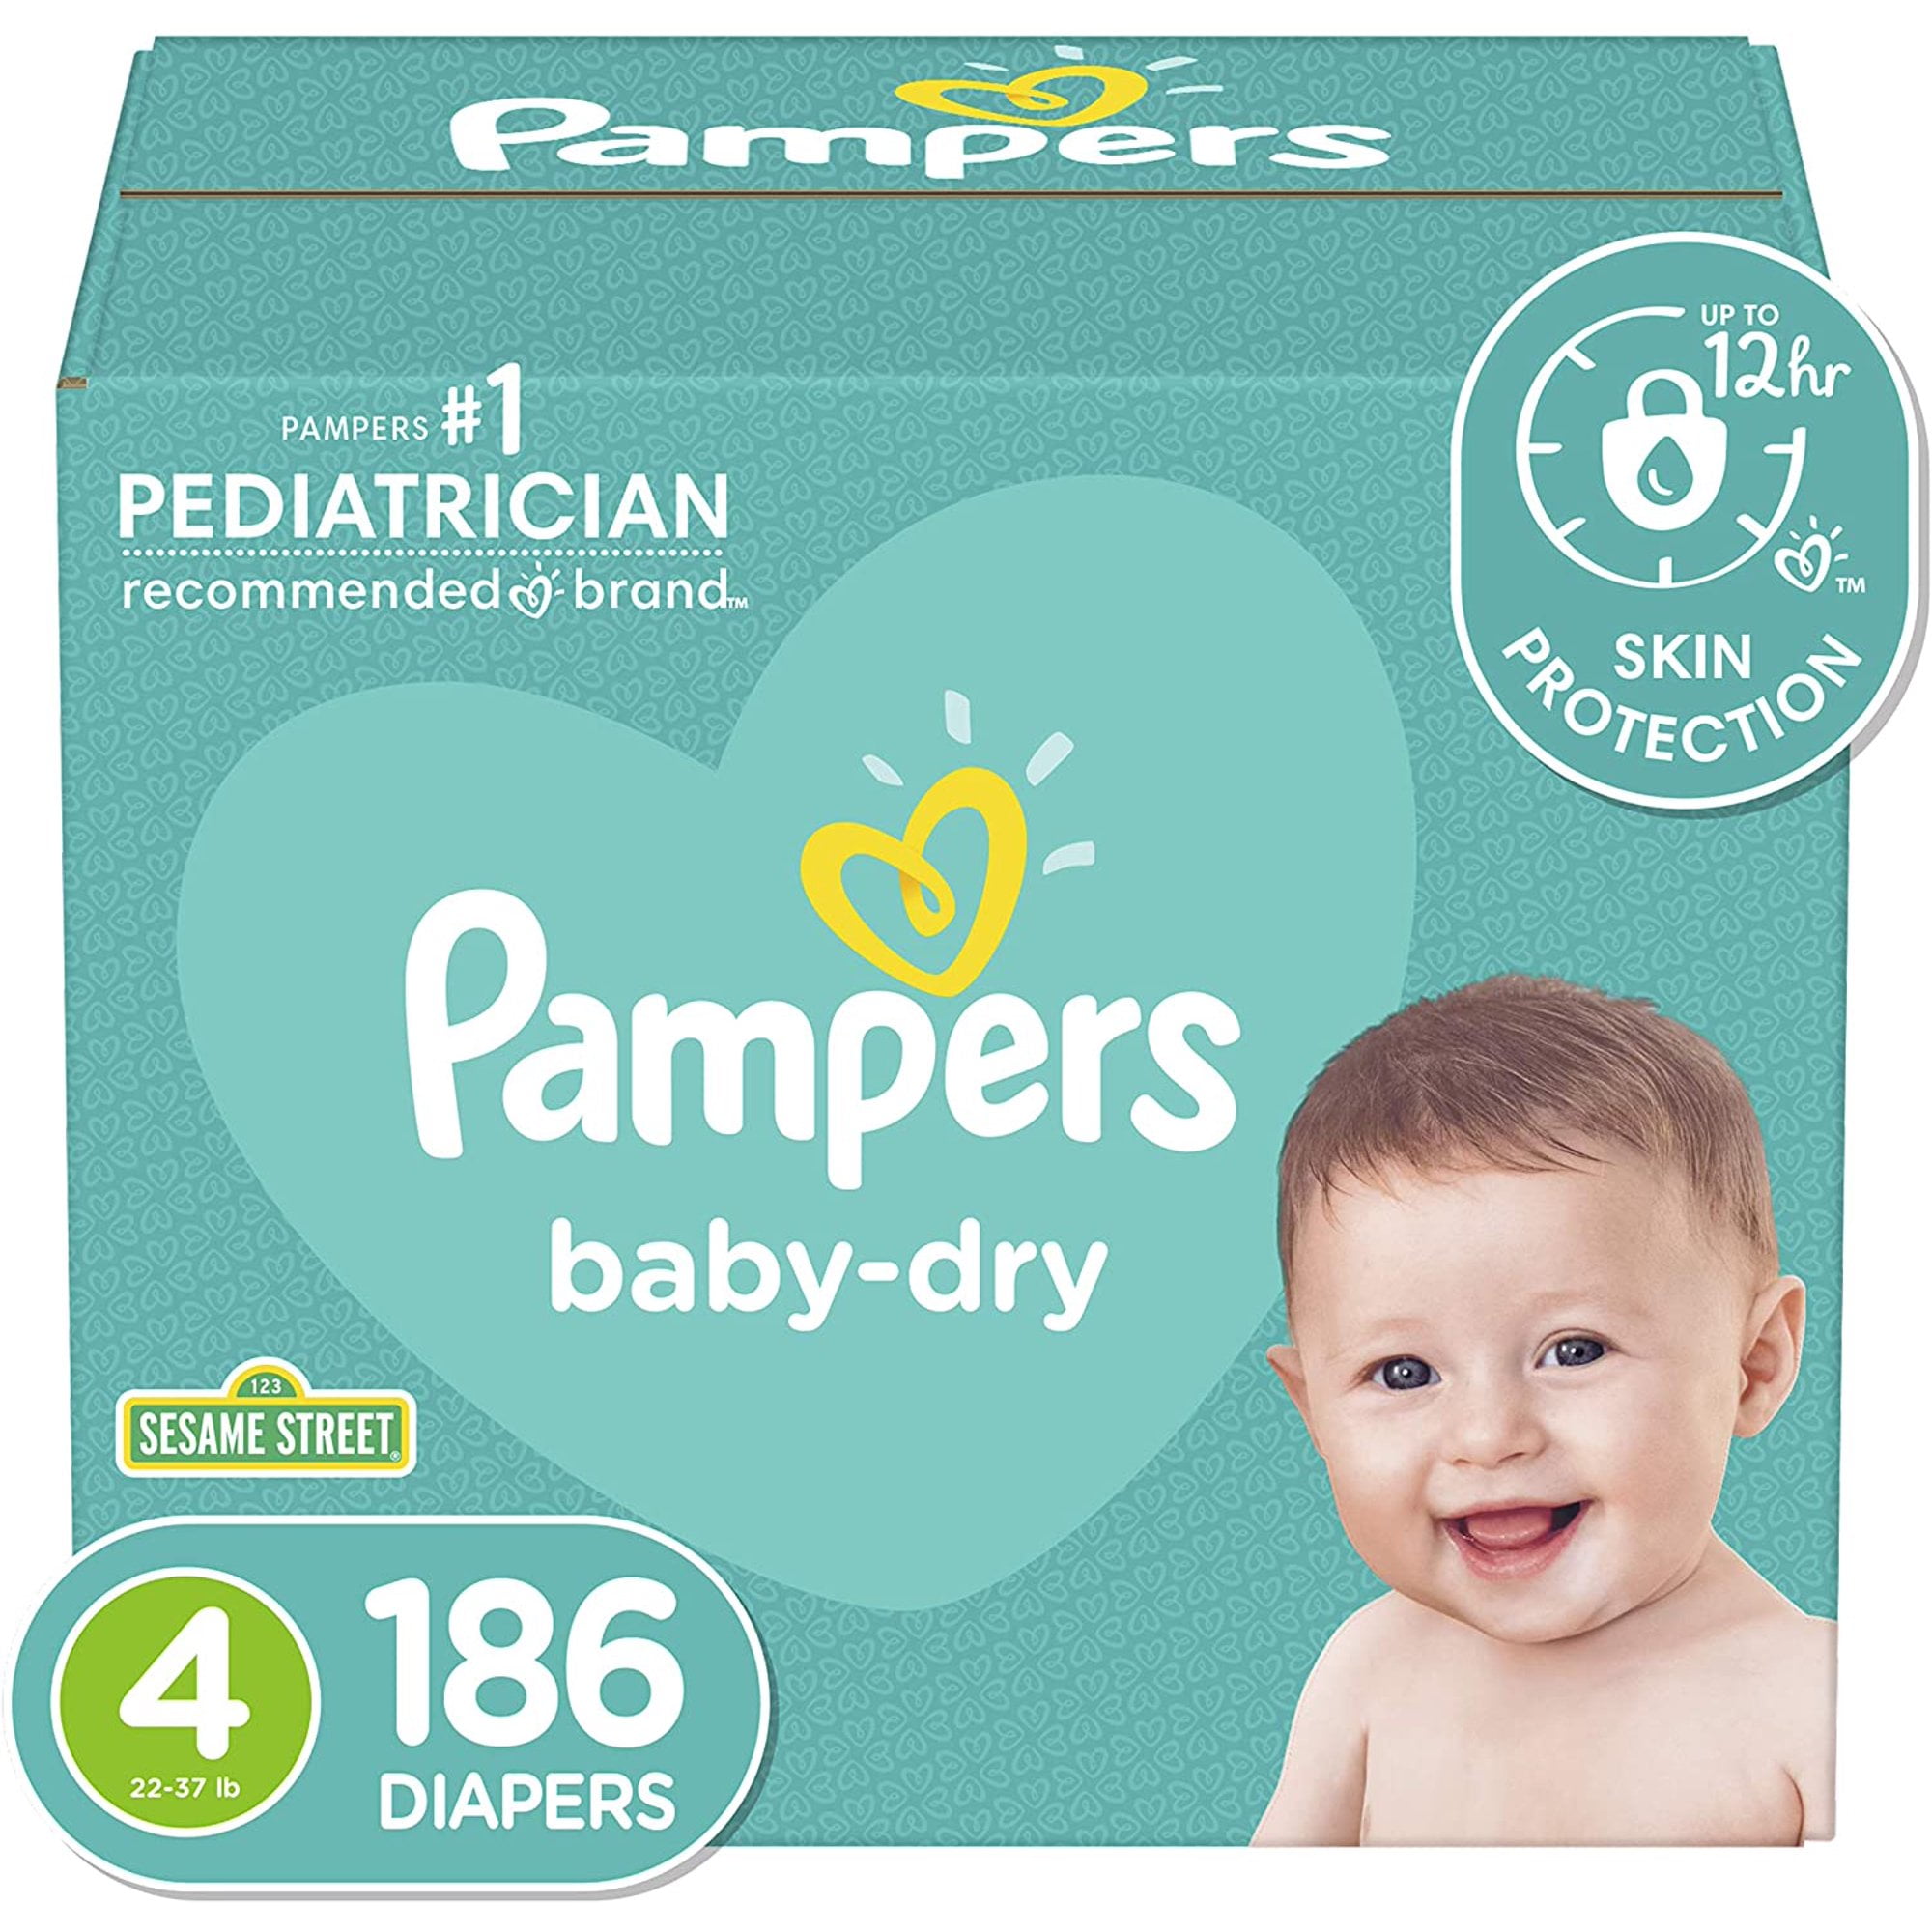 ONE MONTH SUPPLY Pampers Baby Dry Disposable Baby Diapers Diapers Size 4 186 Count 